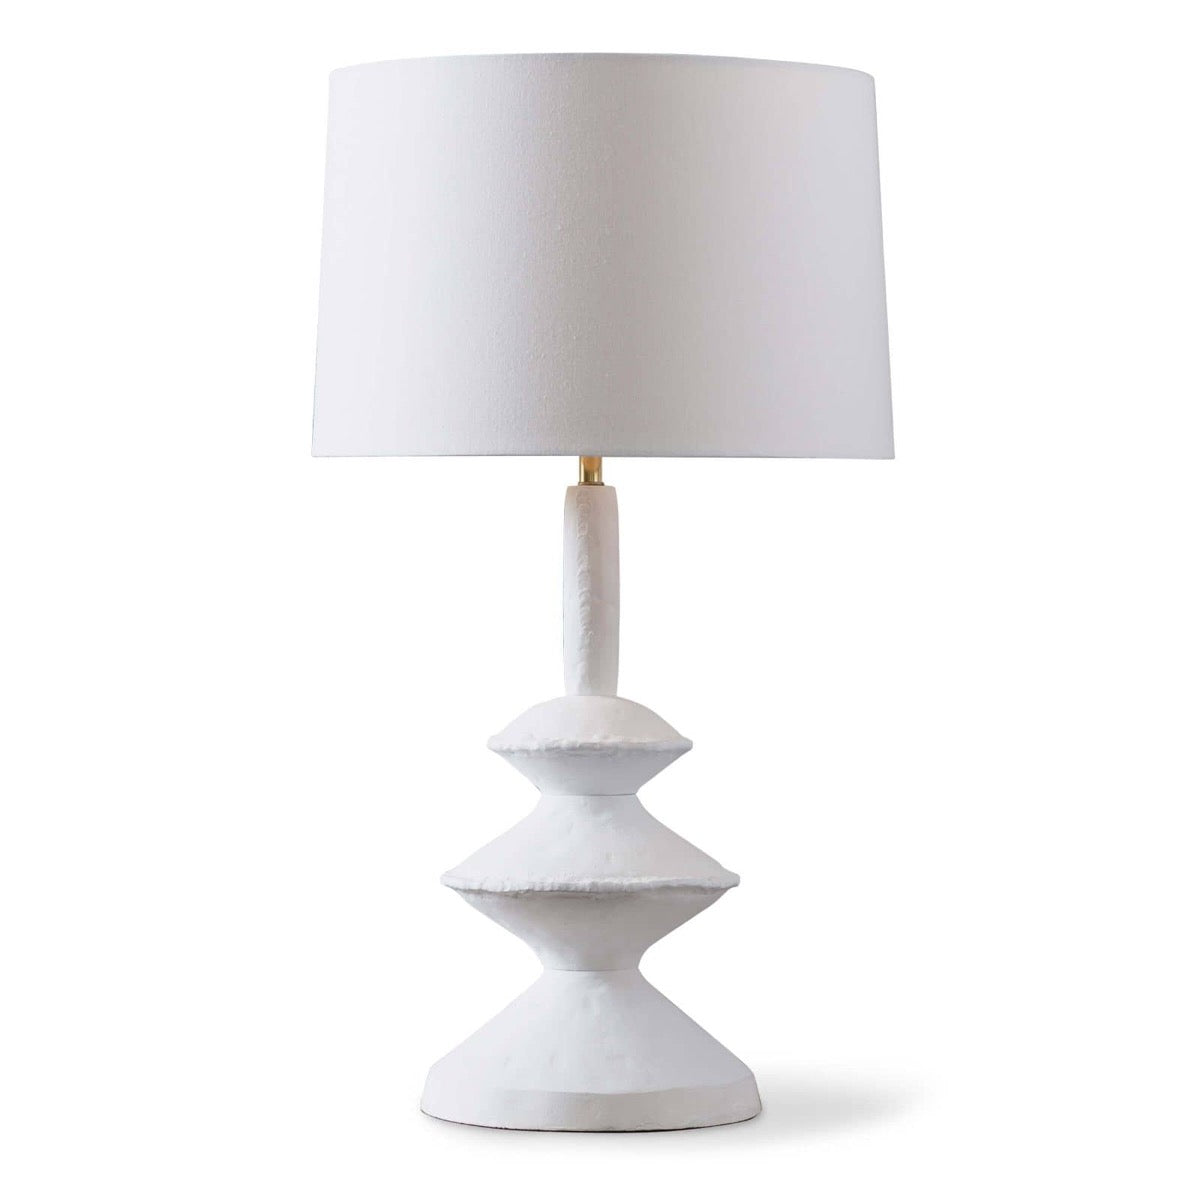 Piper Table Lamp. Front view.